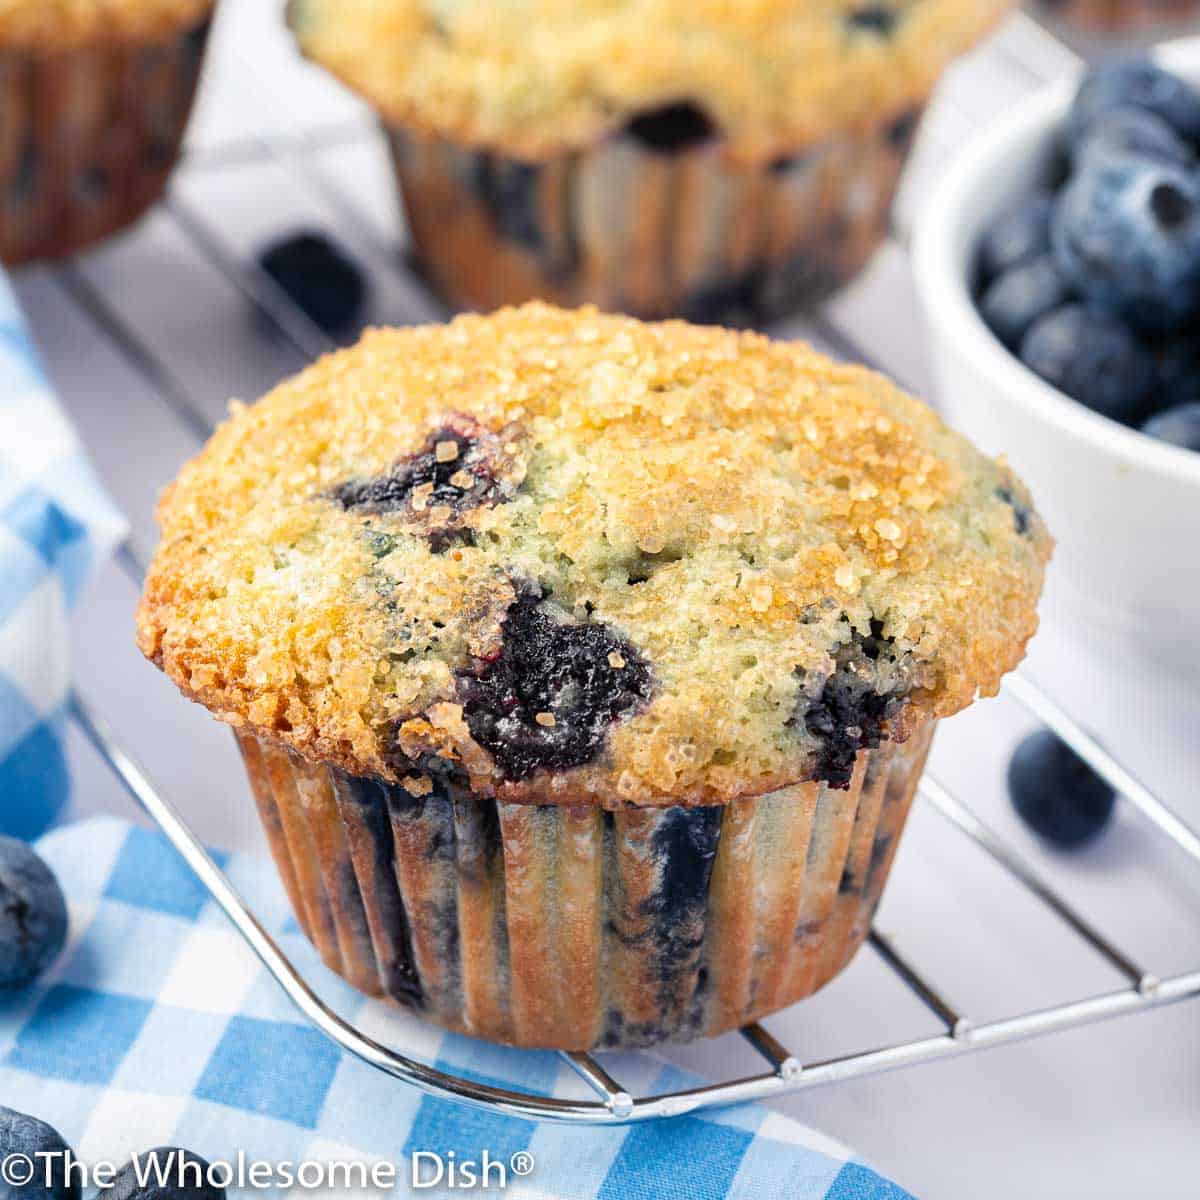 Big baked blueberry muffin on a wire rack.